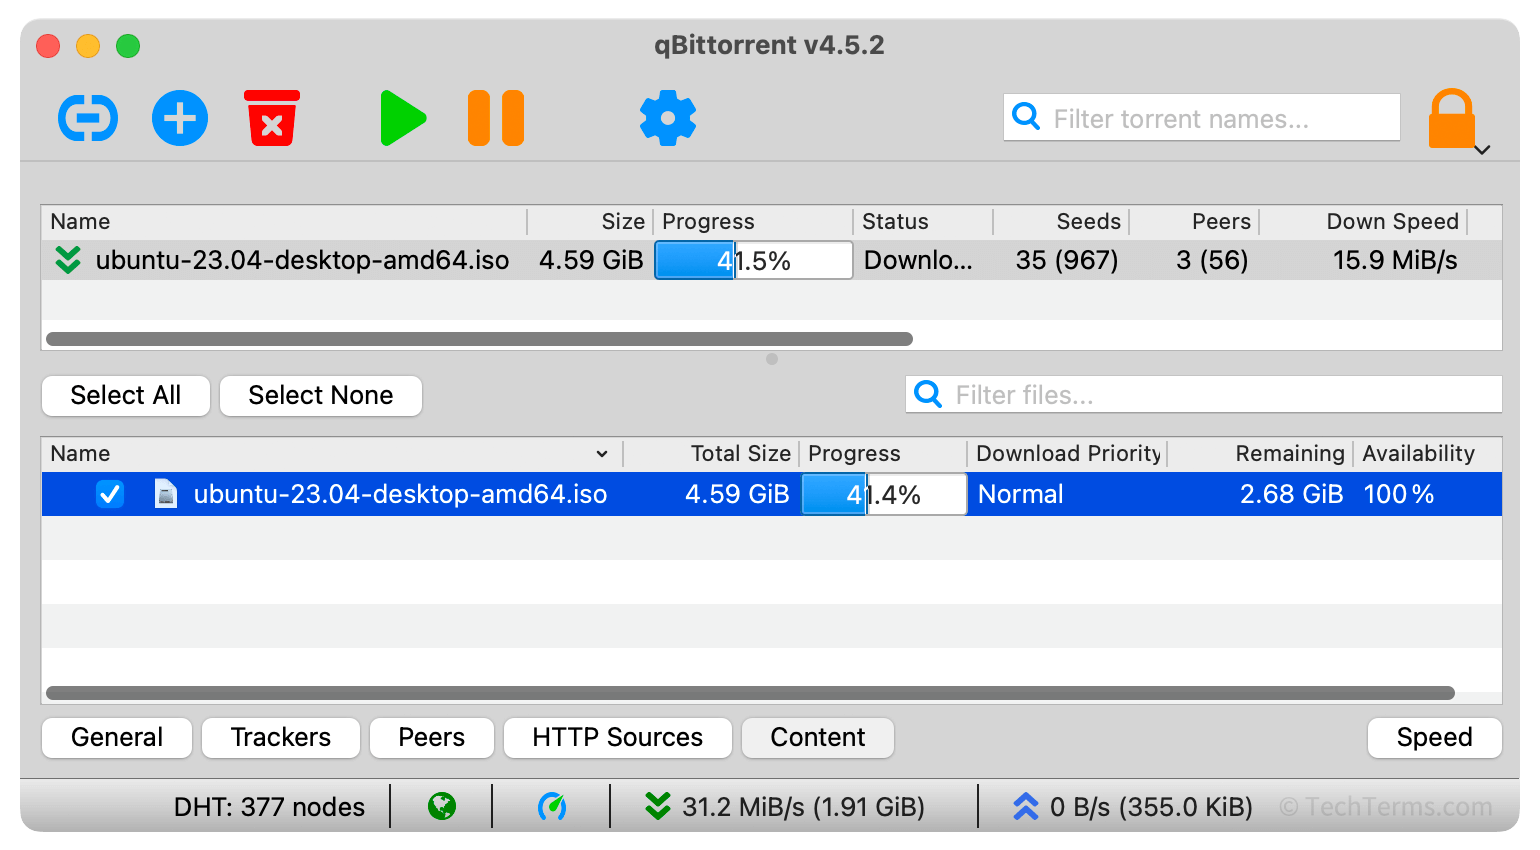 An active torrent containing a single disk image file